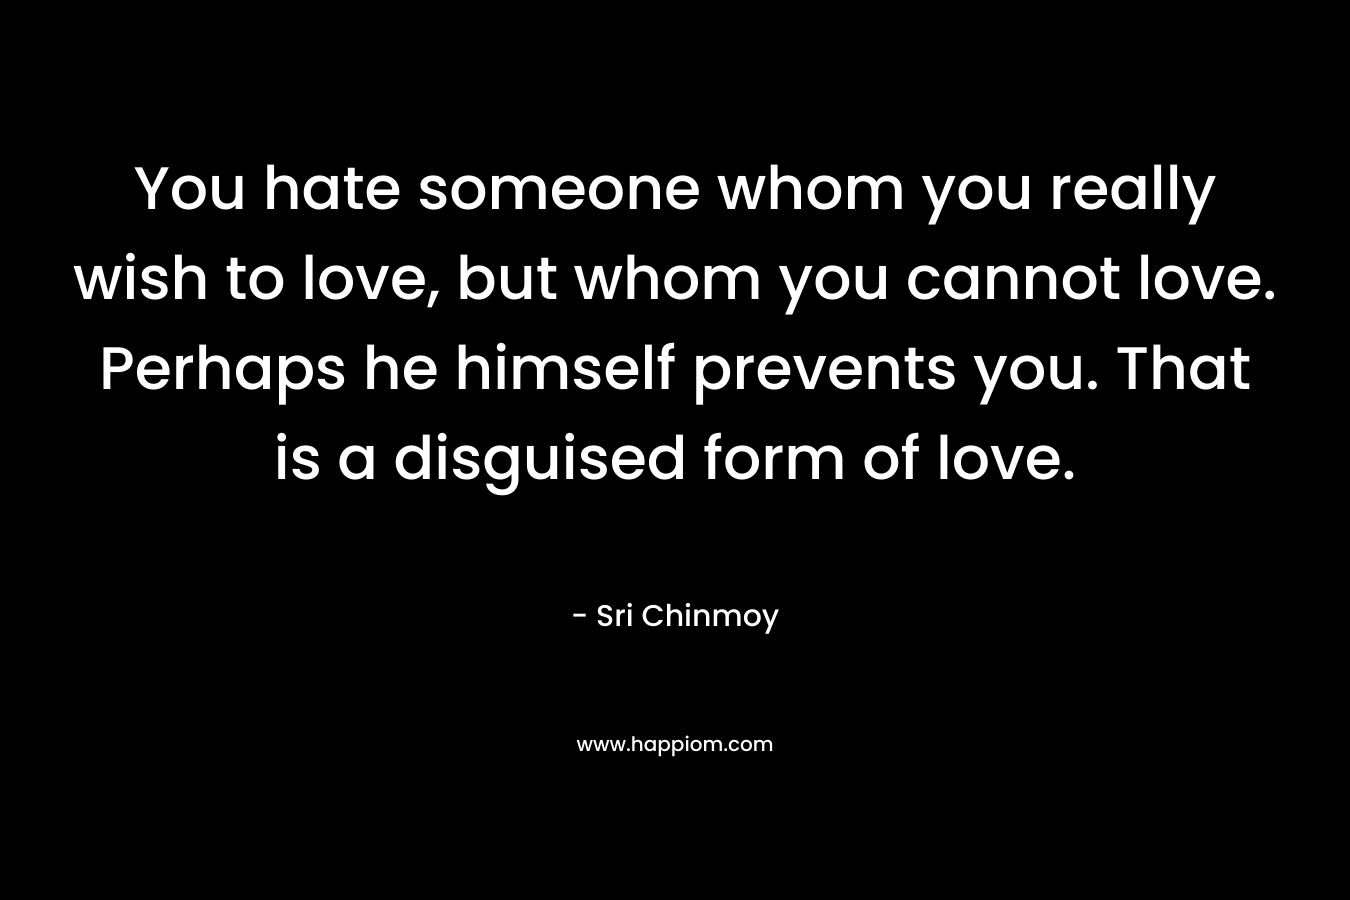 You hate someone whom you really wish to love, but whom you cannot love. Perhaps he himself prevents you. That is a disguised form of love. – Sri Chinmoy